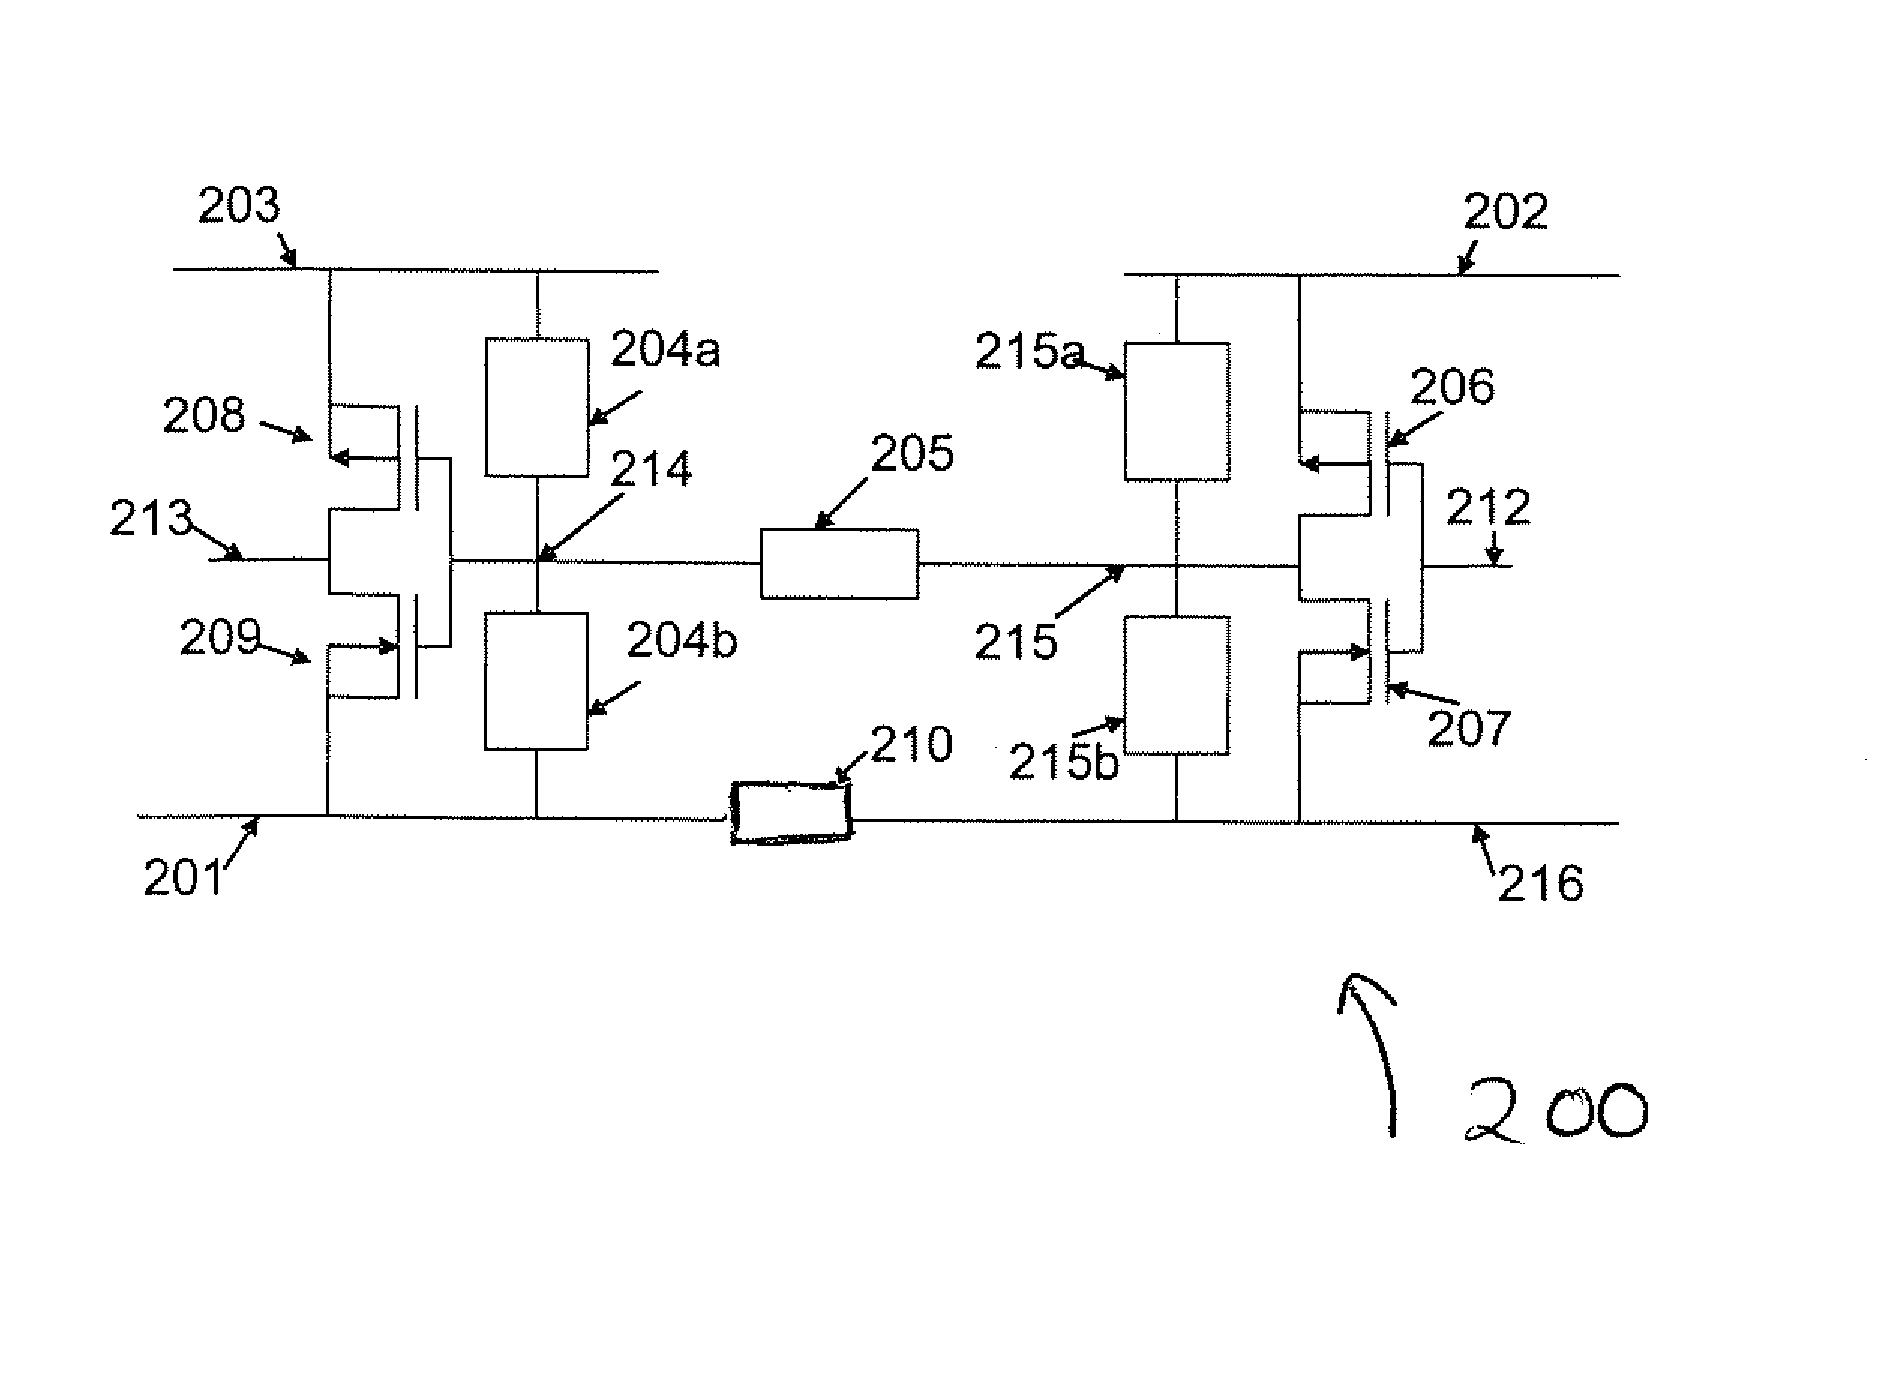 Method and aparatus for improved electrostatic discharge protection